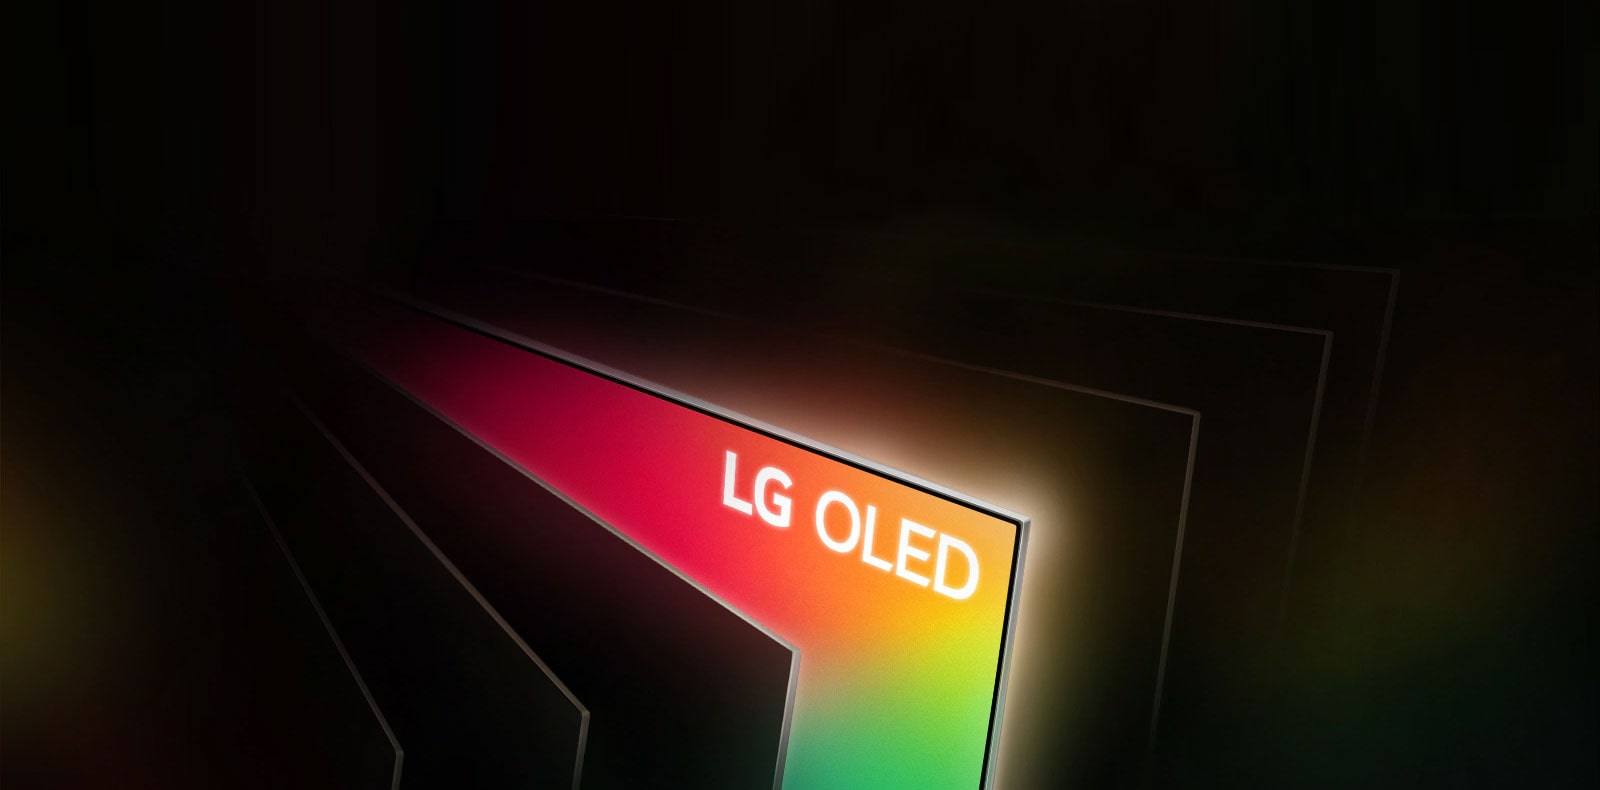 Why is LG OLED so spectacular? 1